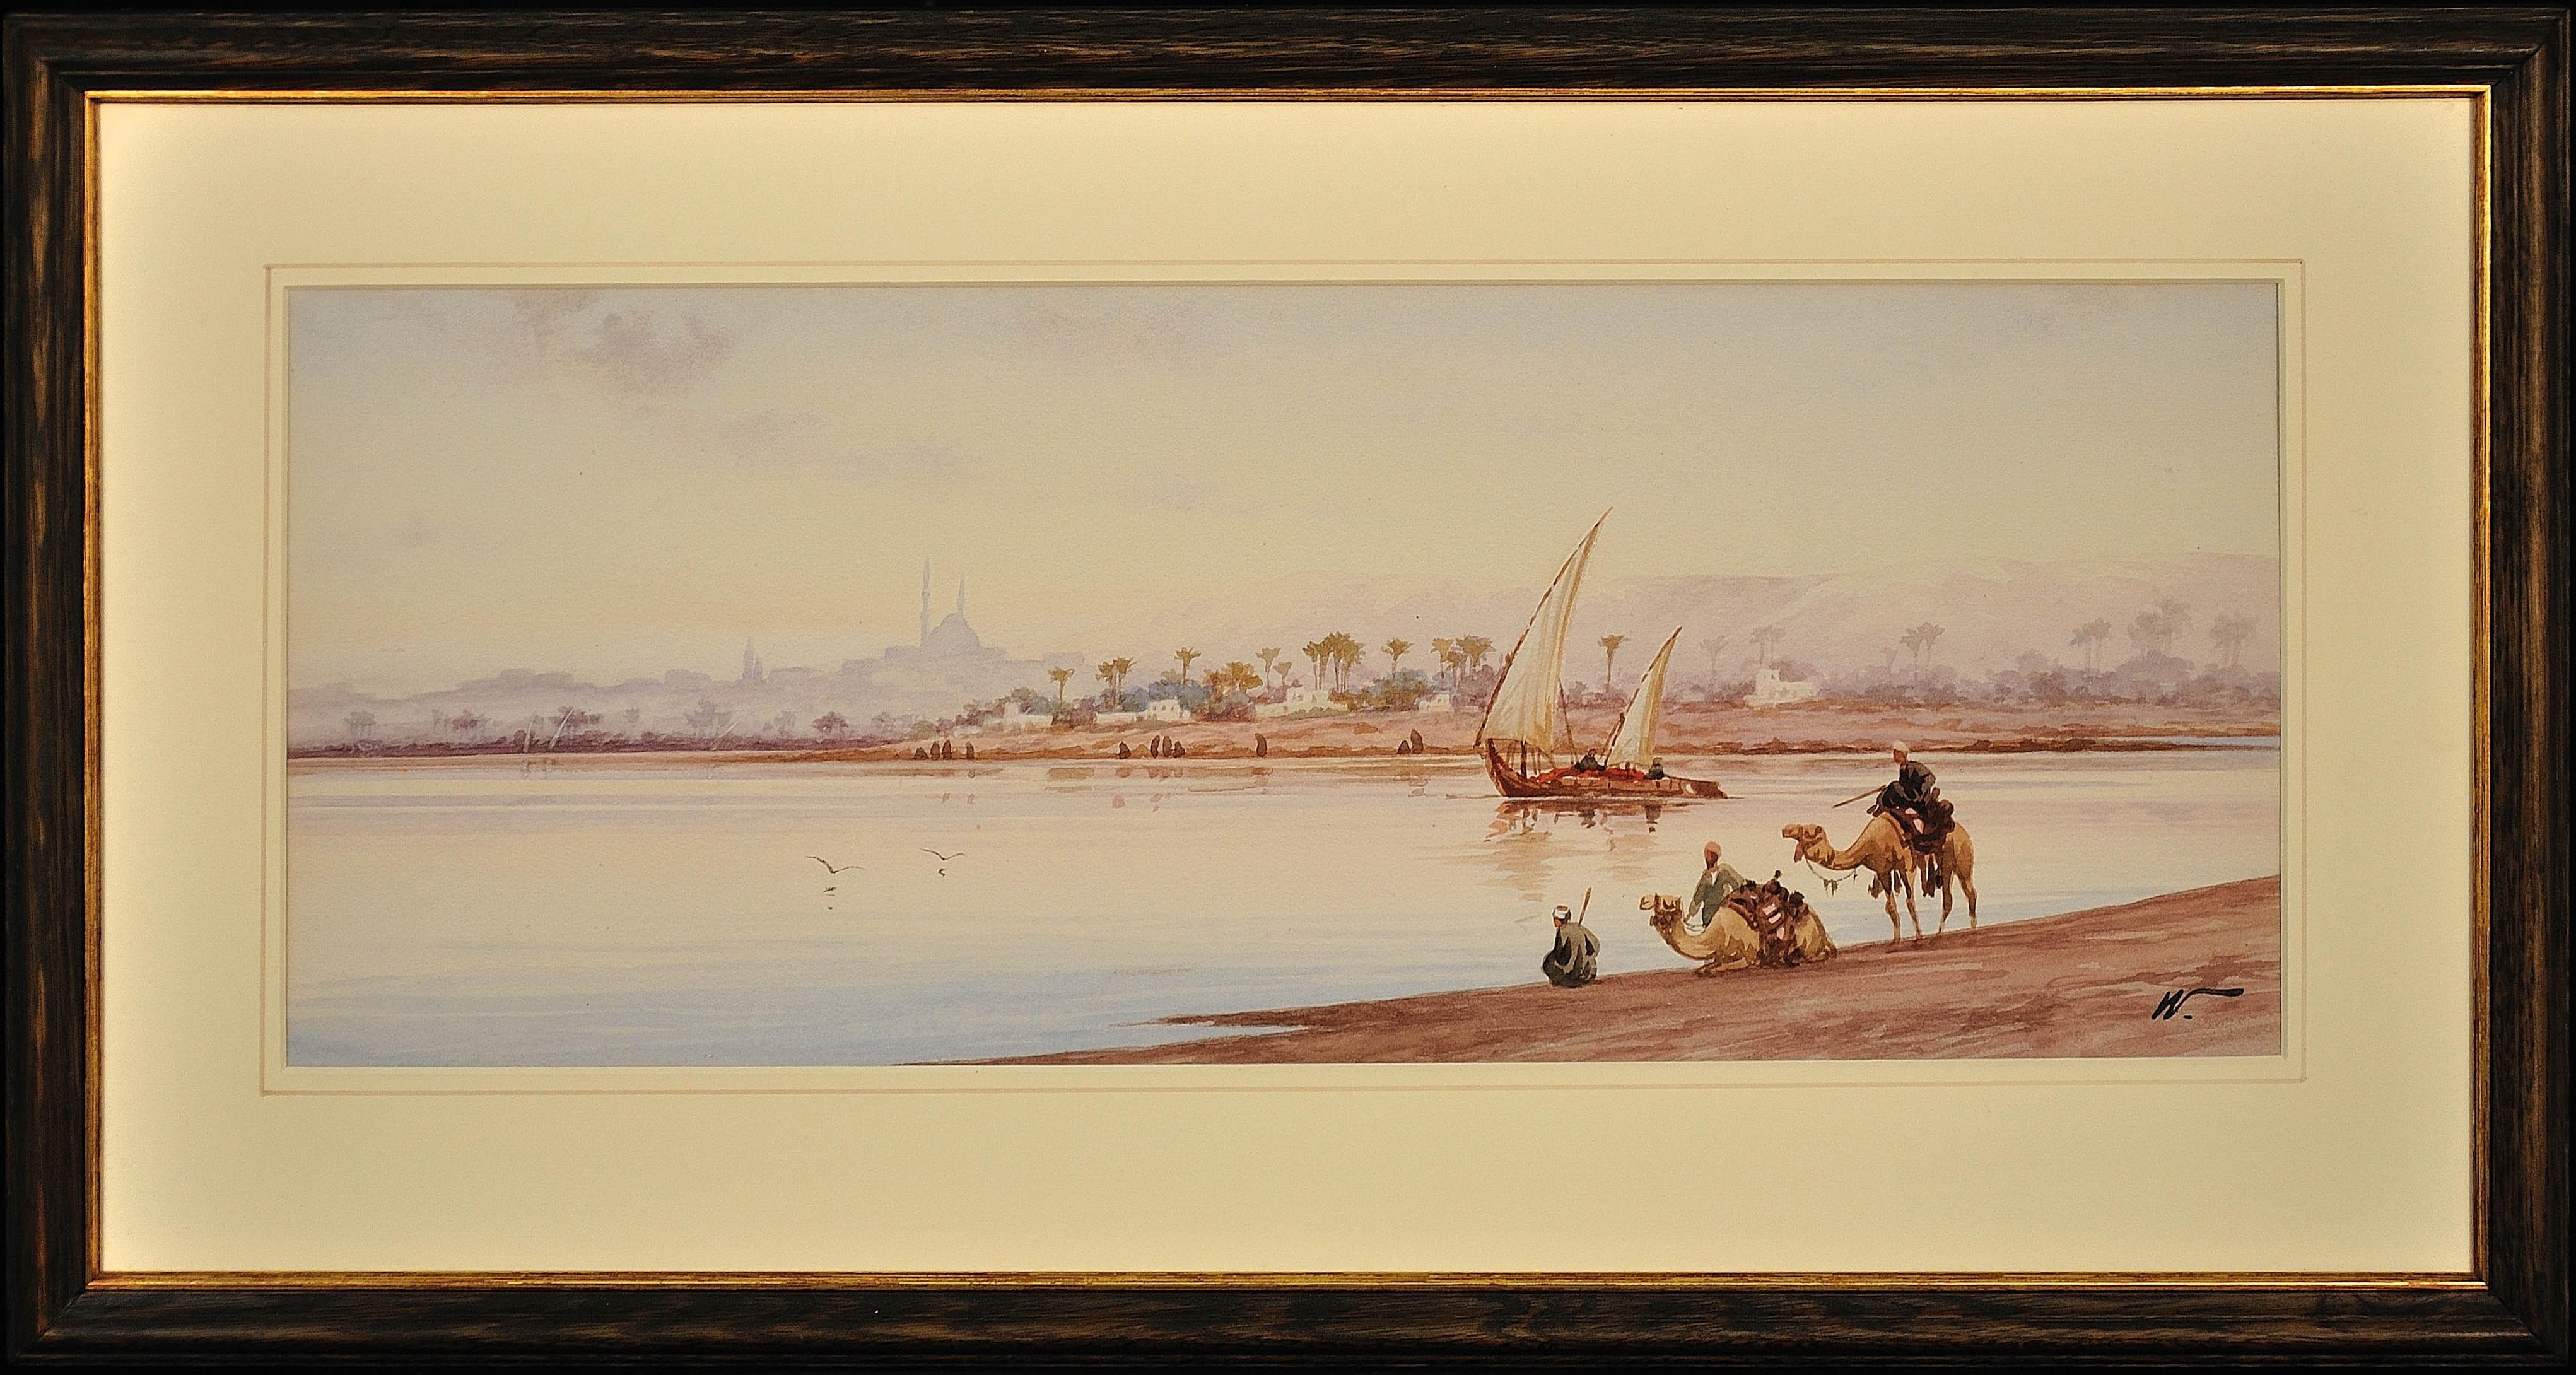 Edwin Lord Weeks Landscape Art - River Nile Feluccas and Camels. Egypt. American Orientalist Watercolor. Mosque.